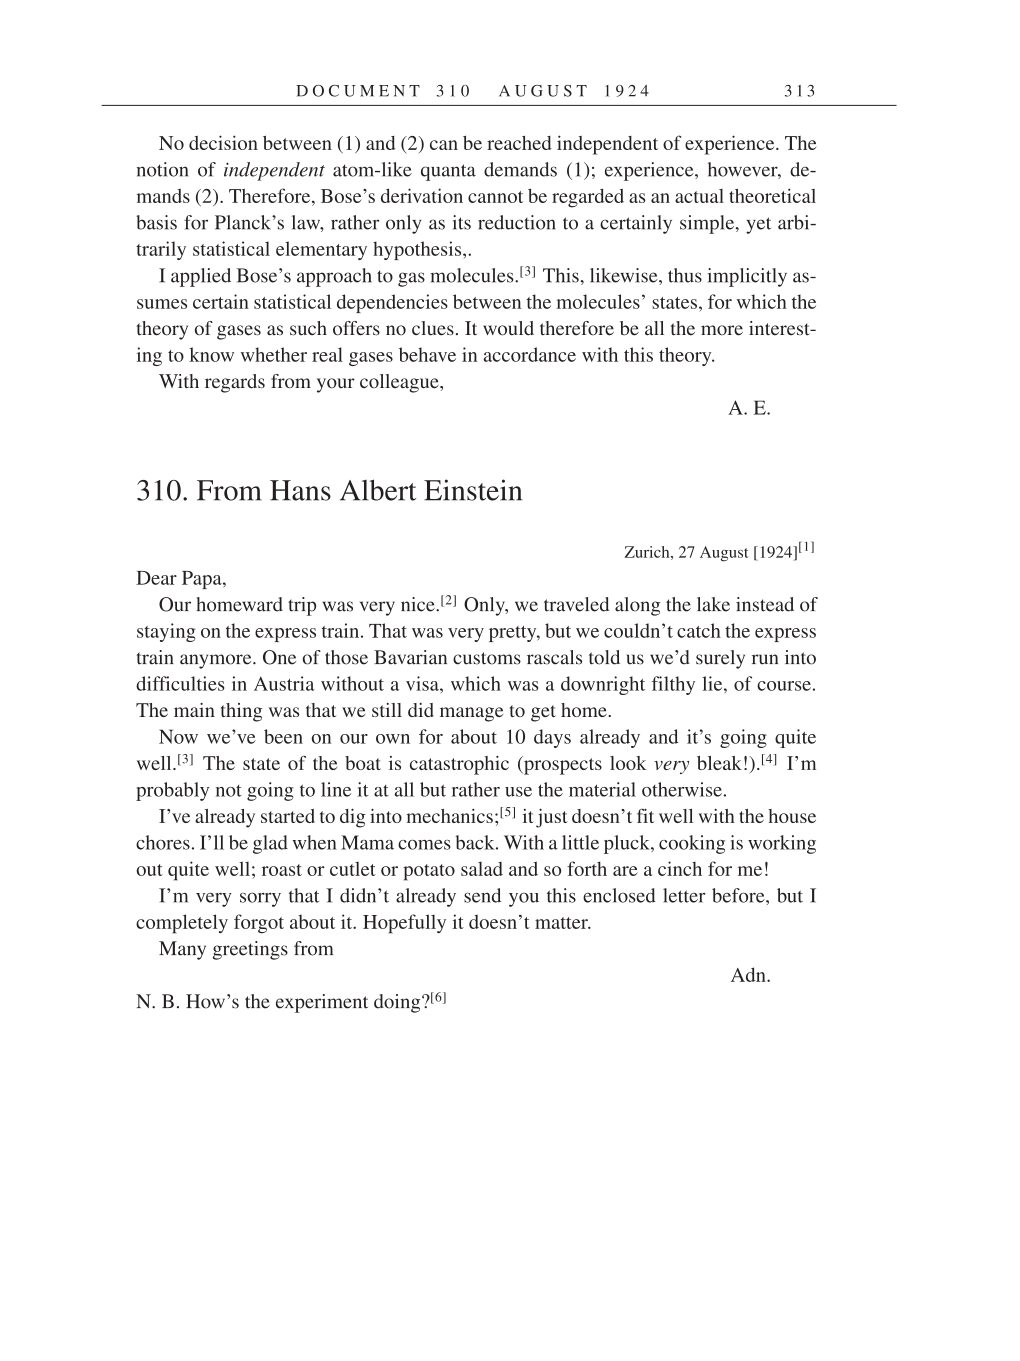 Volume 14: The Berlin Years: Writings & Correspondence, April 1923-May 1925 (English Translation Supplement) page 313